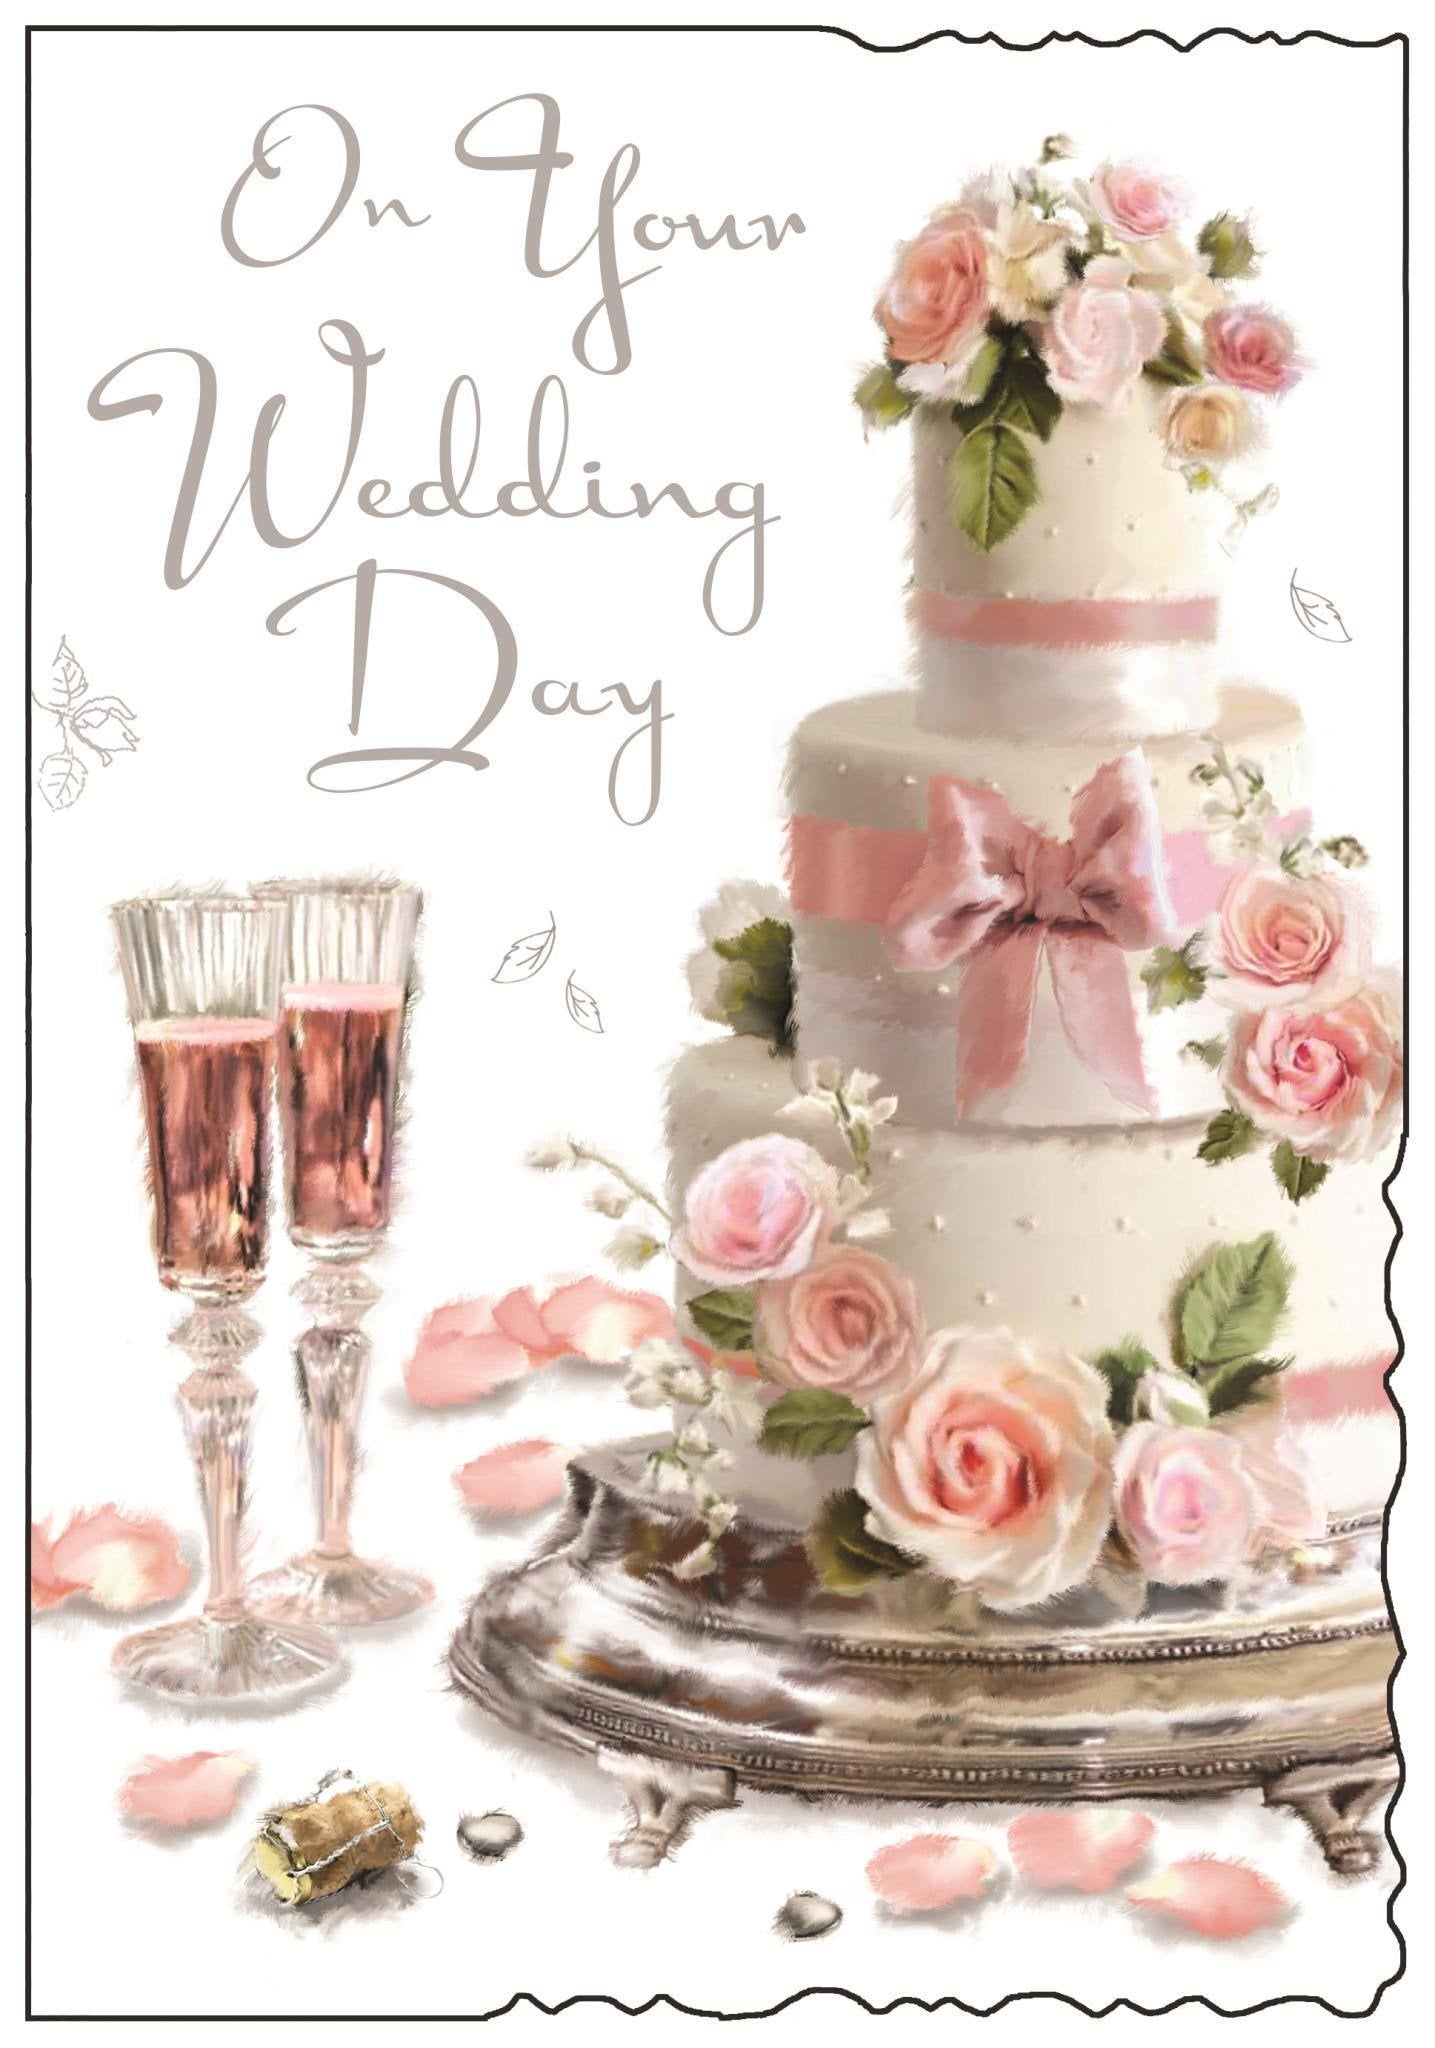 Front of On Your Wedding Day Cake Greetings Card